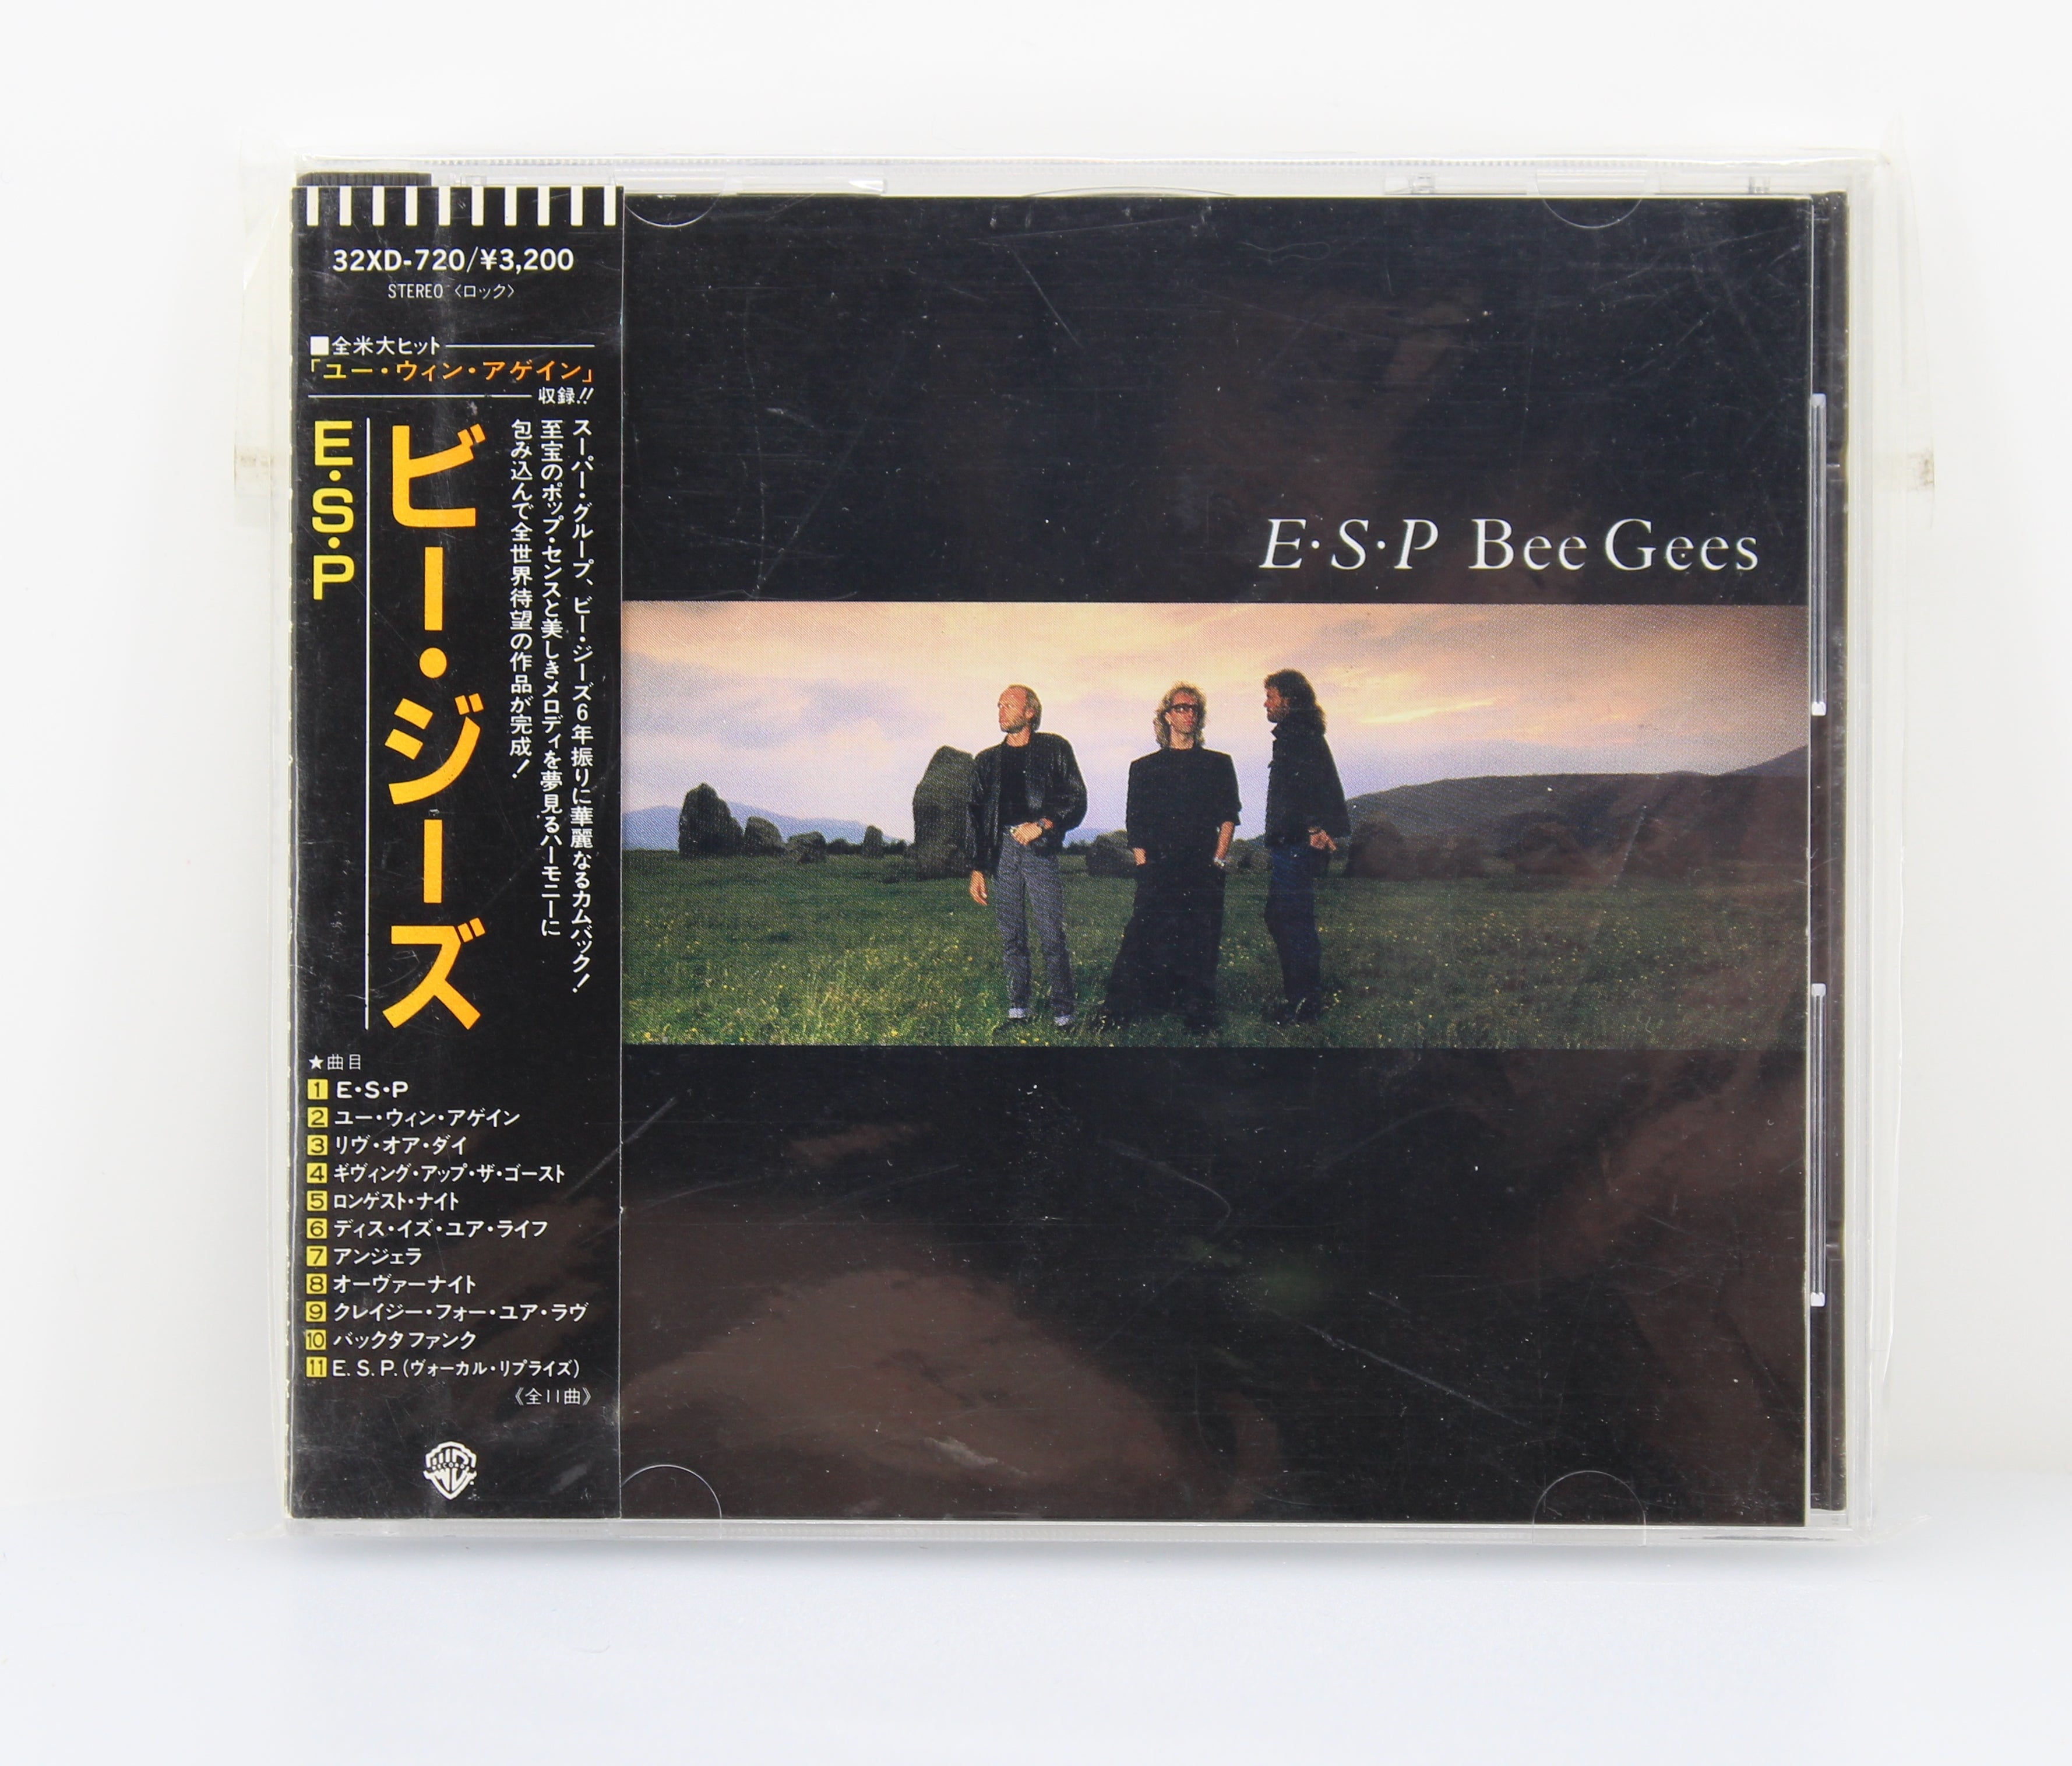 One by Bee Gees CD - Made in Russia - Brand New, Factory Shrink